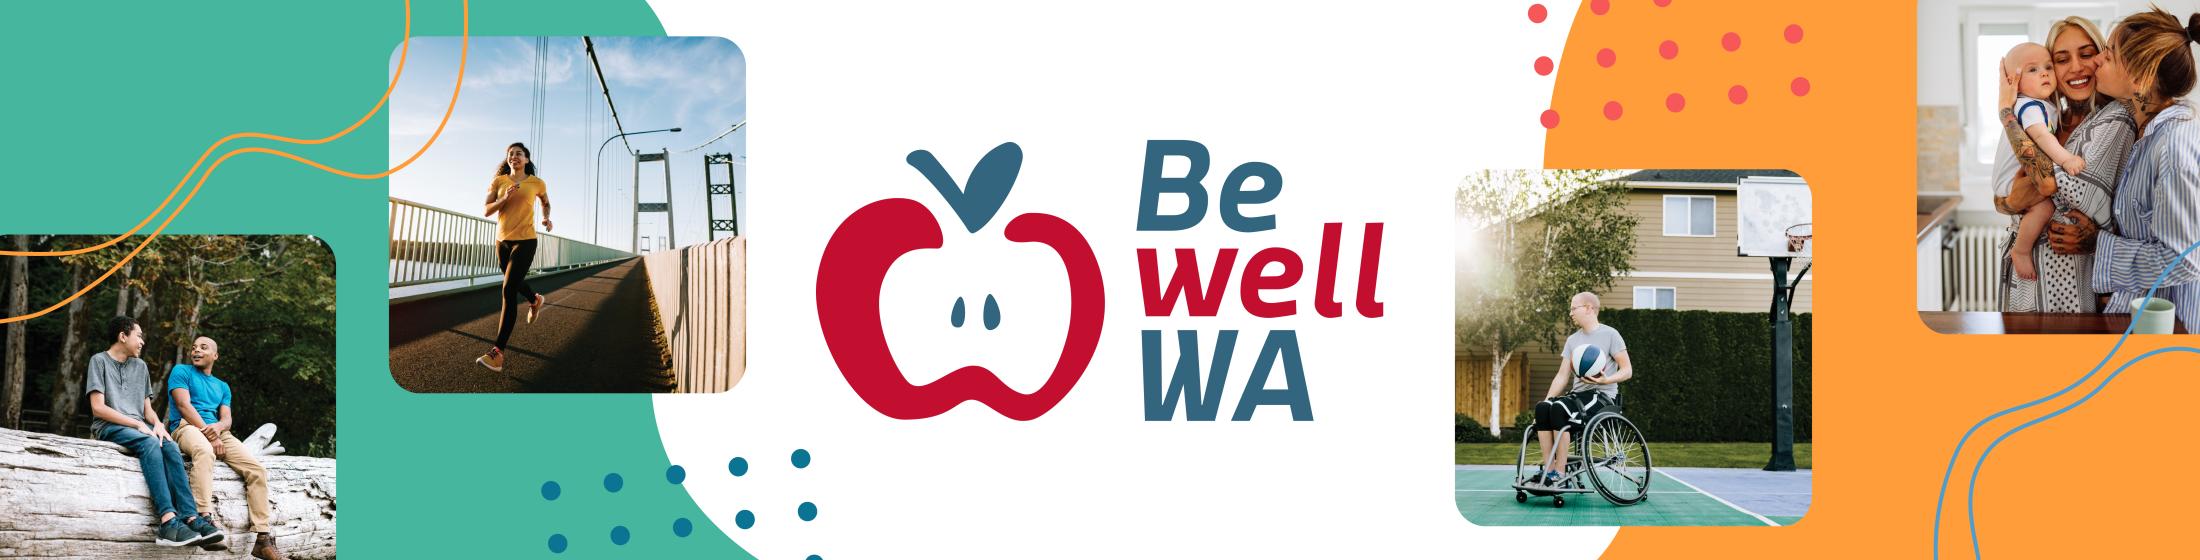 Pictures of people engaging in healthy activities and the Be Well WA logo.